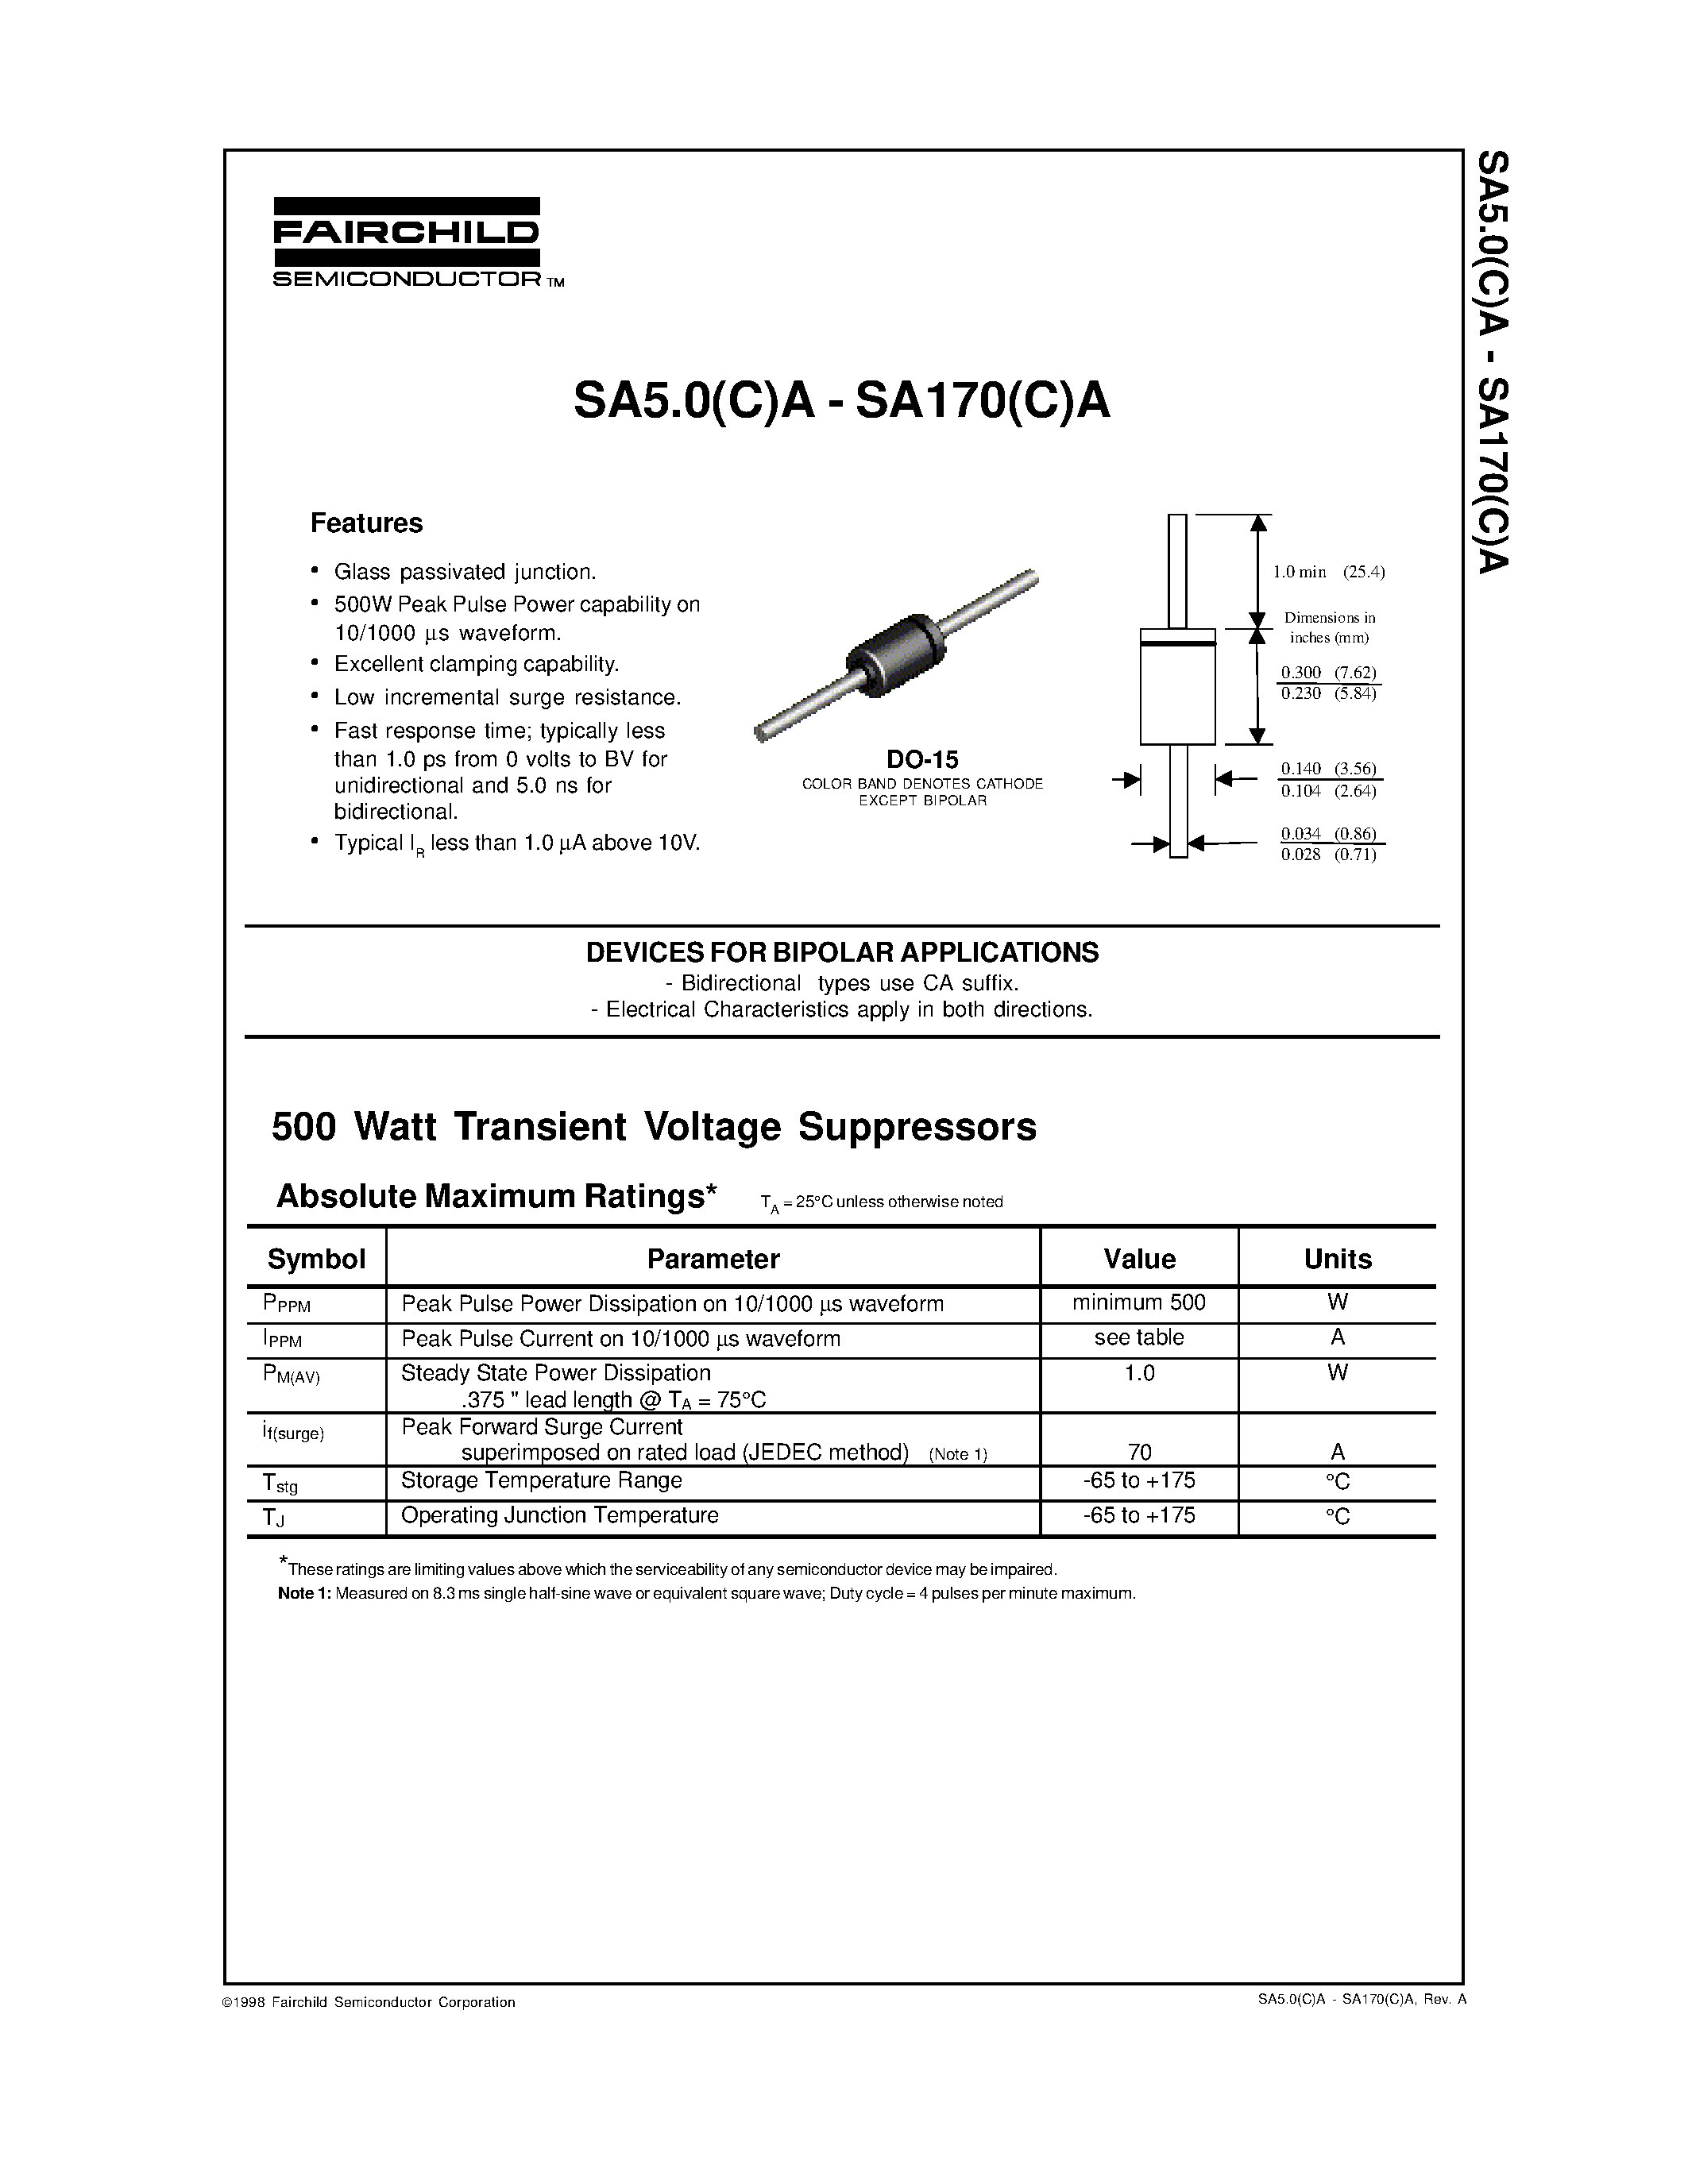 Datasheet SA30(C)A - DEVICES FOR BIPOLAR APPLICATIONS page 1